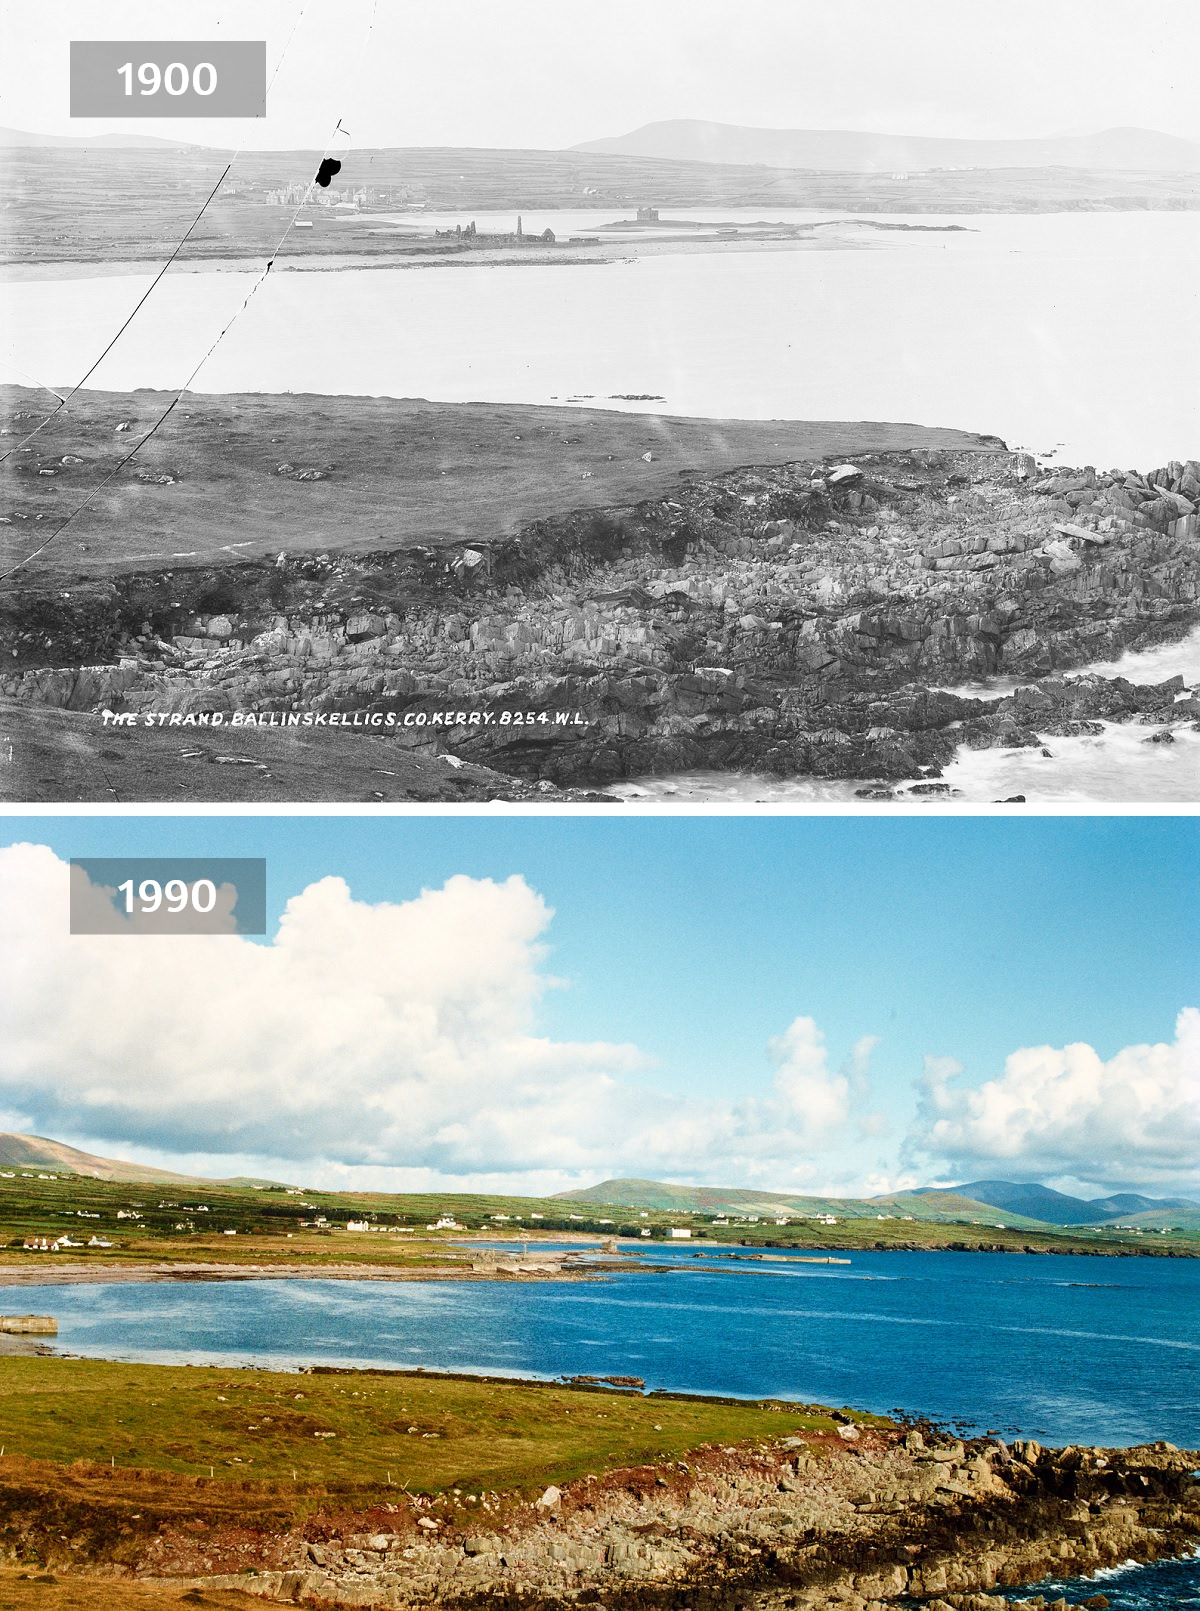 The Strand, Ballinskelligs, Kerry, 1900-1990